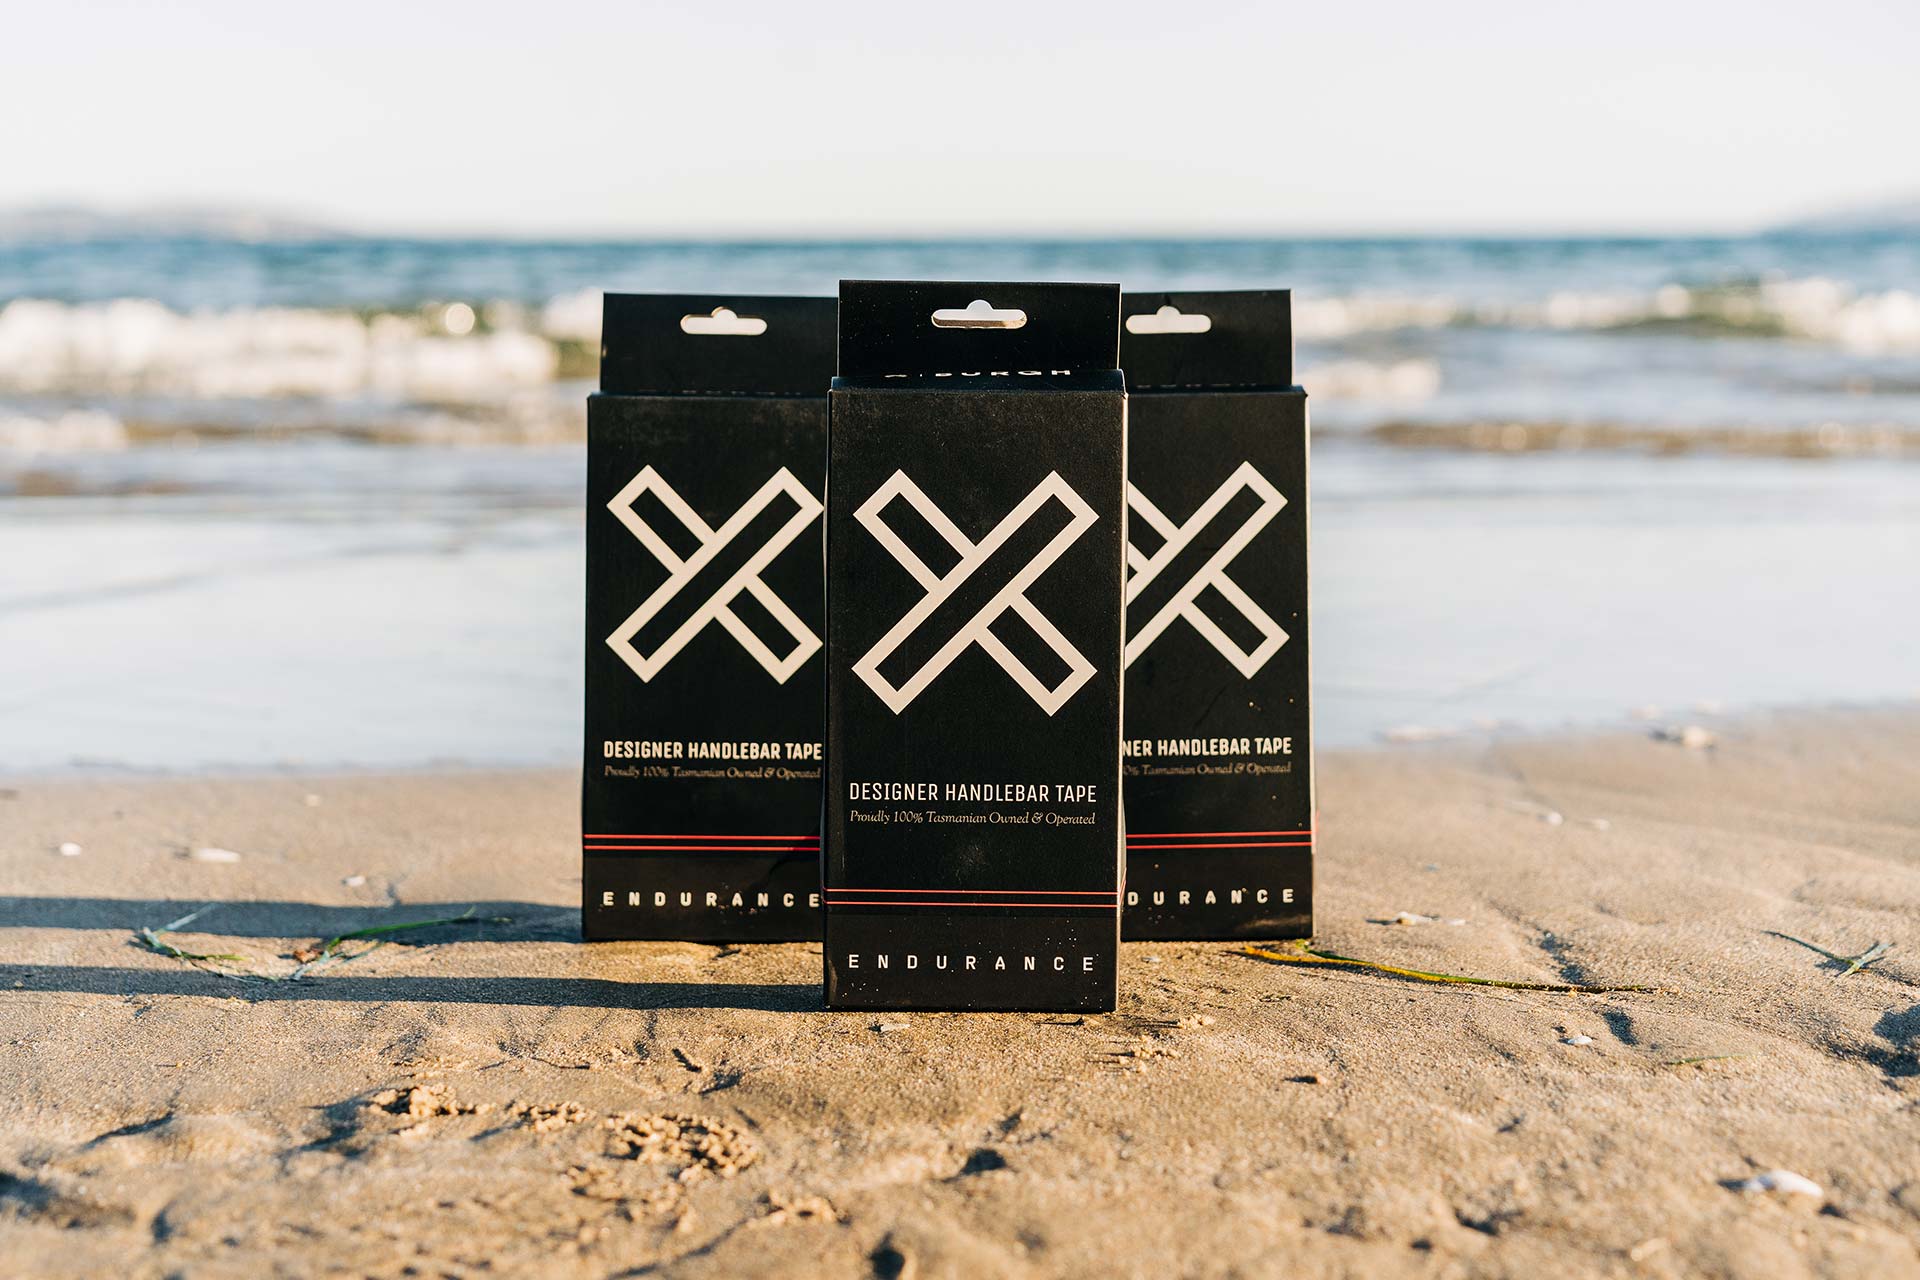 Three boxes of Burgh Bar Tape sitting on the beach with the waves in the background